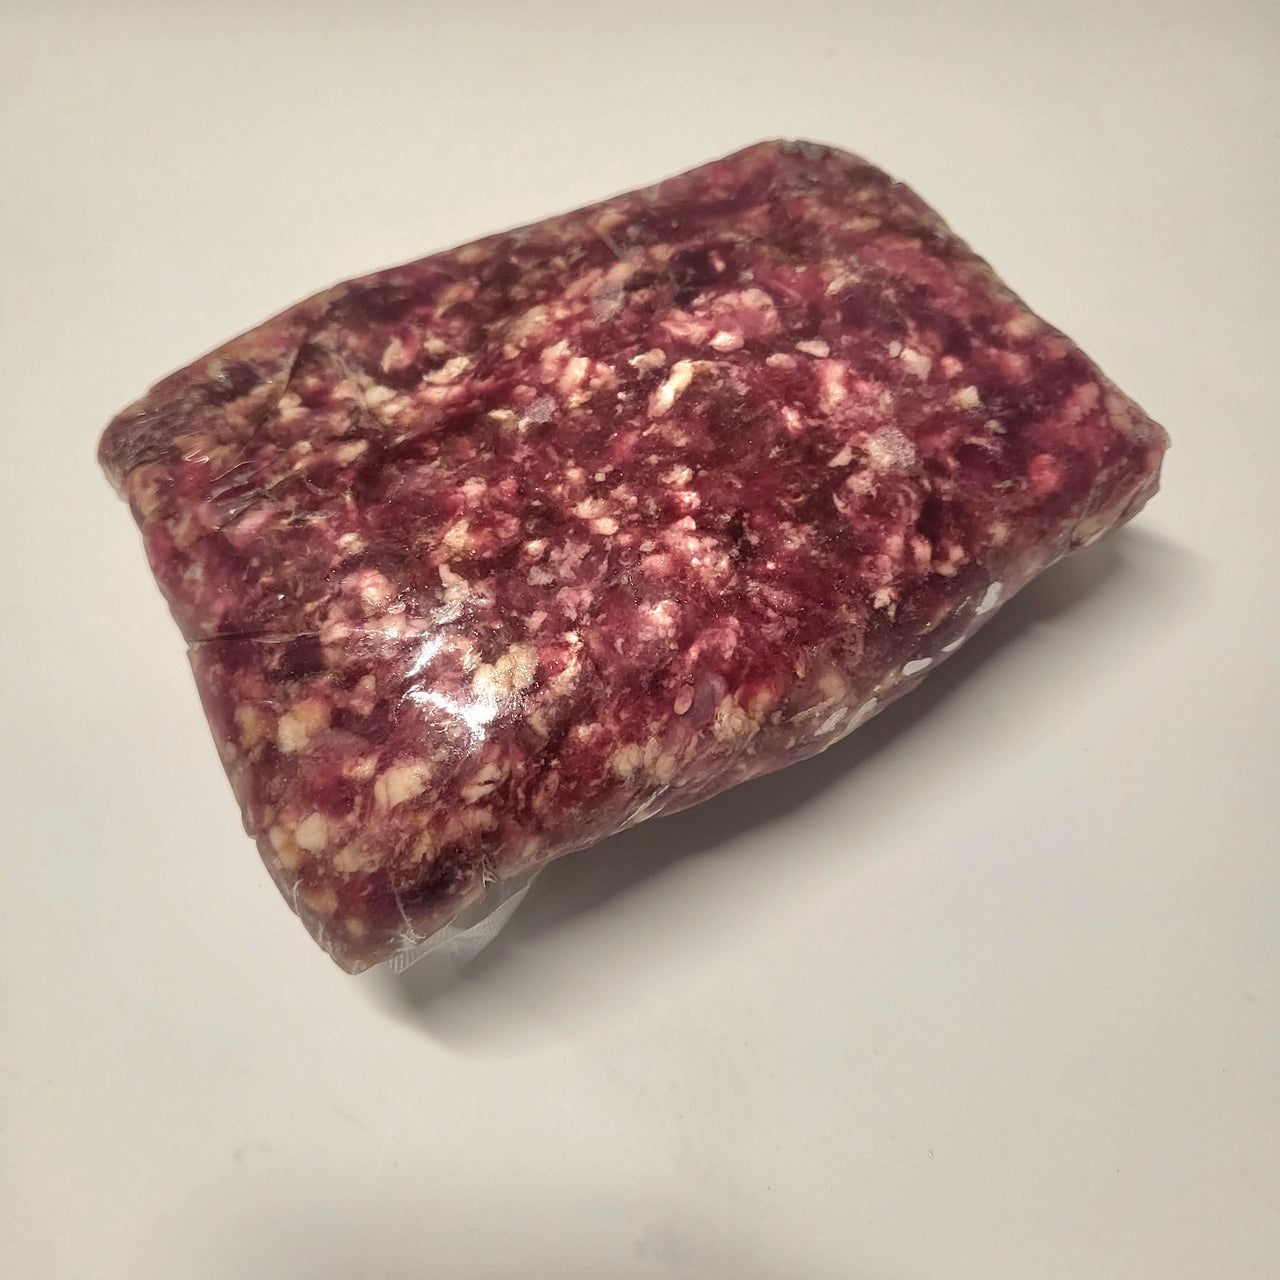 Grass Fed Grass Finished Beef Ground 80/20 Blend Japanese Black Wagyu Beef Full Blood AGED 21+ Days